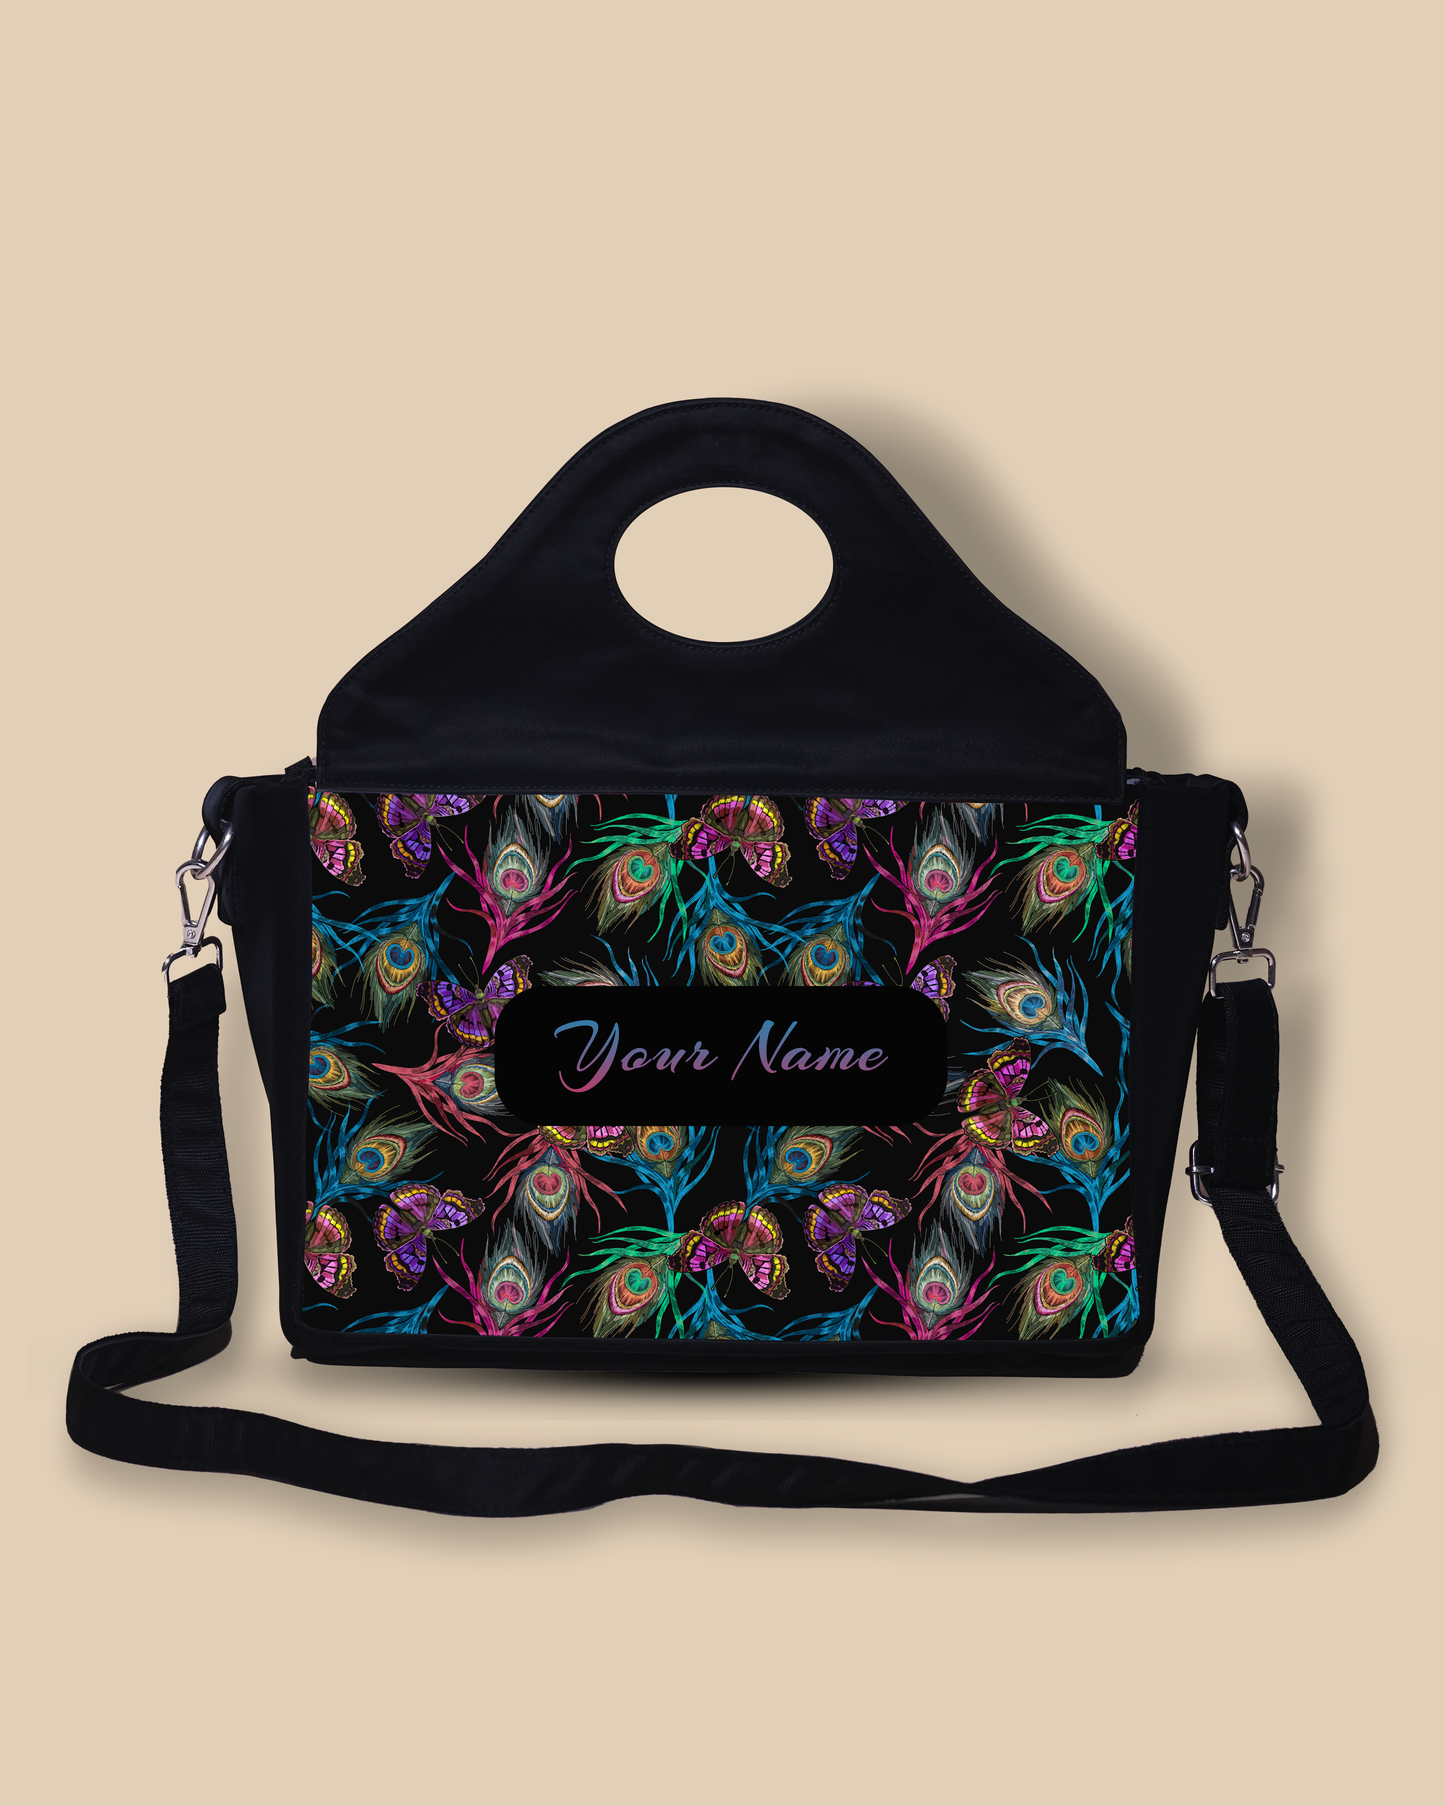 Customized Sling Purse Designed With Colourful Peacock Feather And Flying Butterflies Pattern